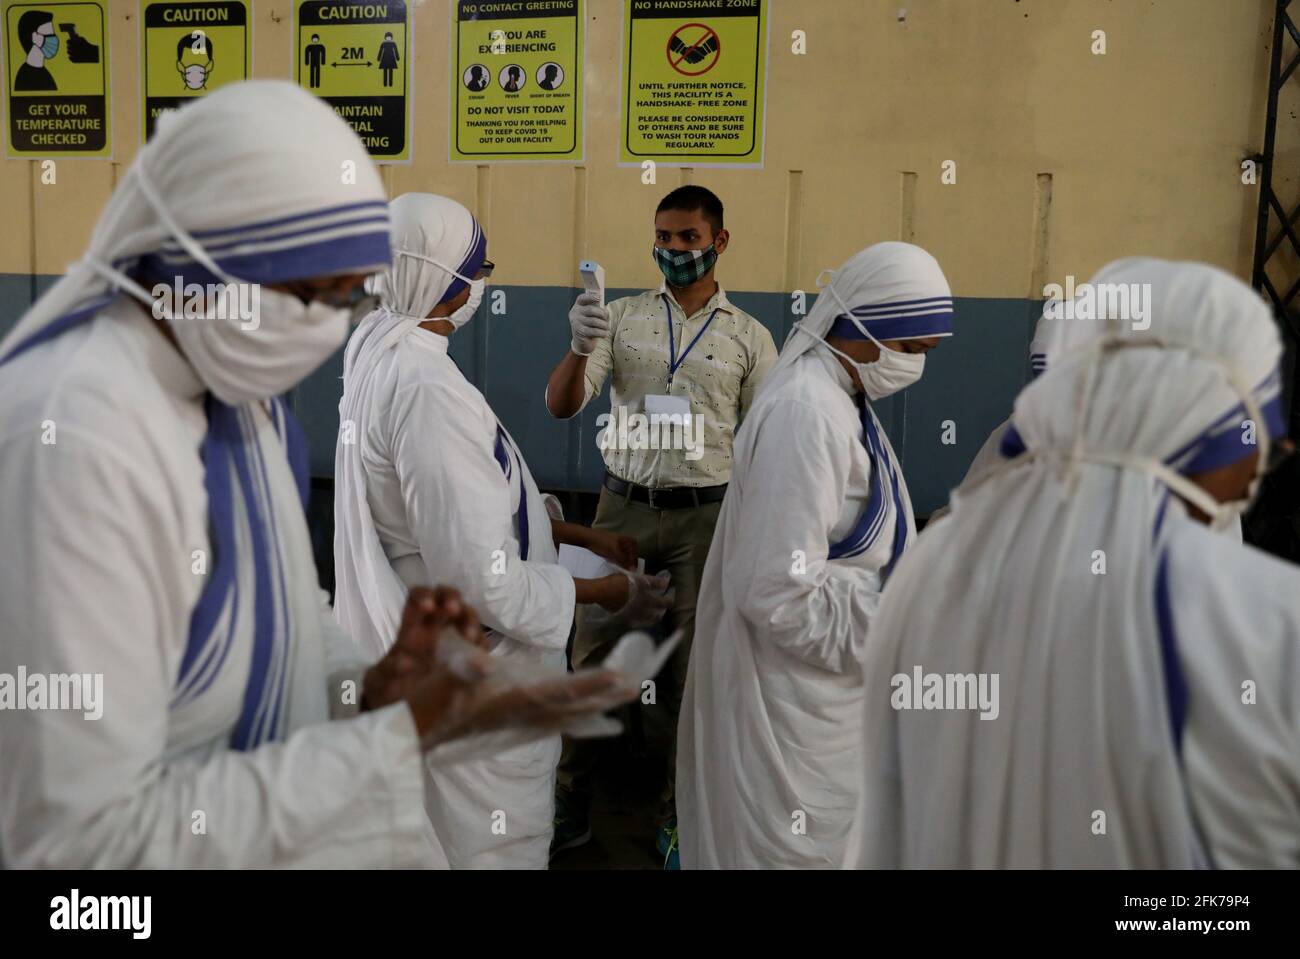 An election official checks the temperature of Catholic nuns from the Missionaries of Charity, the global order of nuns founded by Saint Mother Teresa, before they cast their vote outside a polling station during the eight and final phase of West Bengal state election, amid the spread of the coronavirus disease (COVID-19) in Kolkata, India, April 29, 2021. REUTERS/Rupak De Chowdhuri Stock Photo